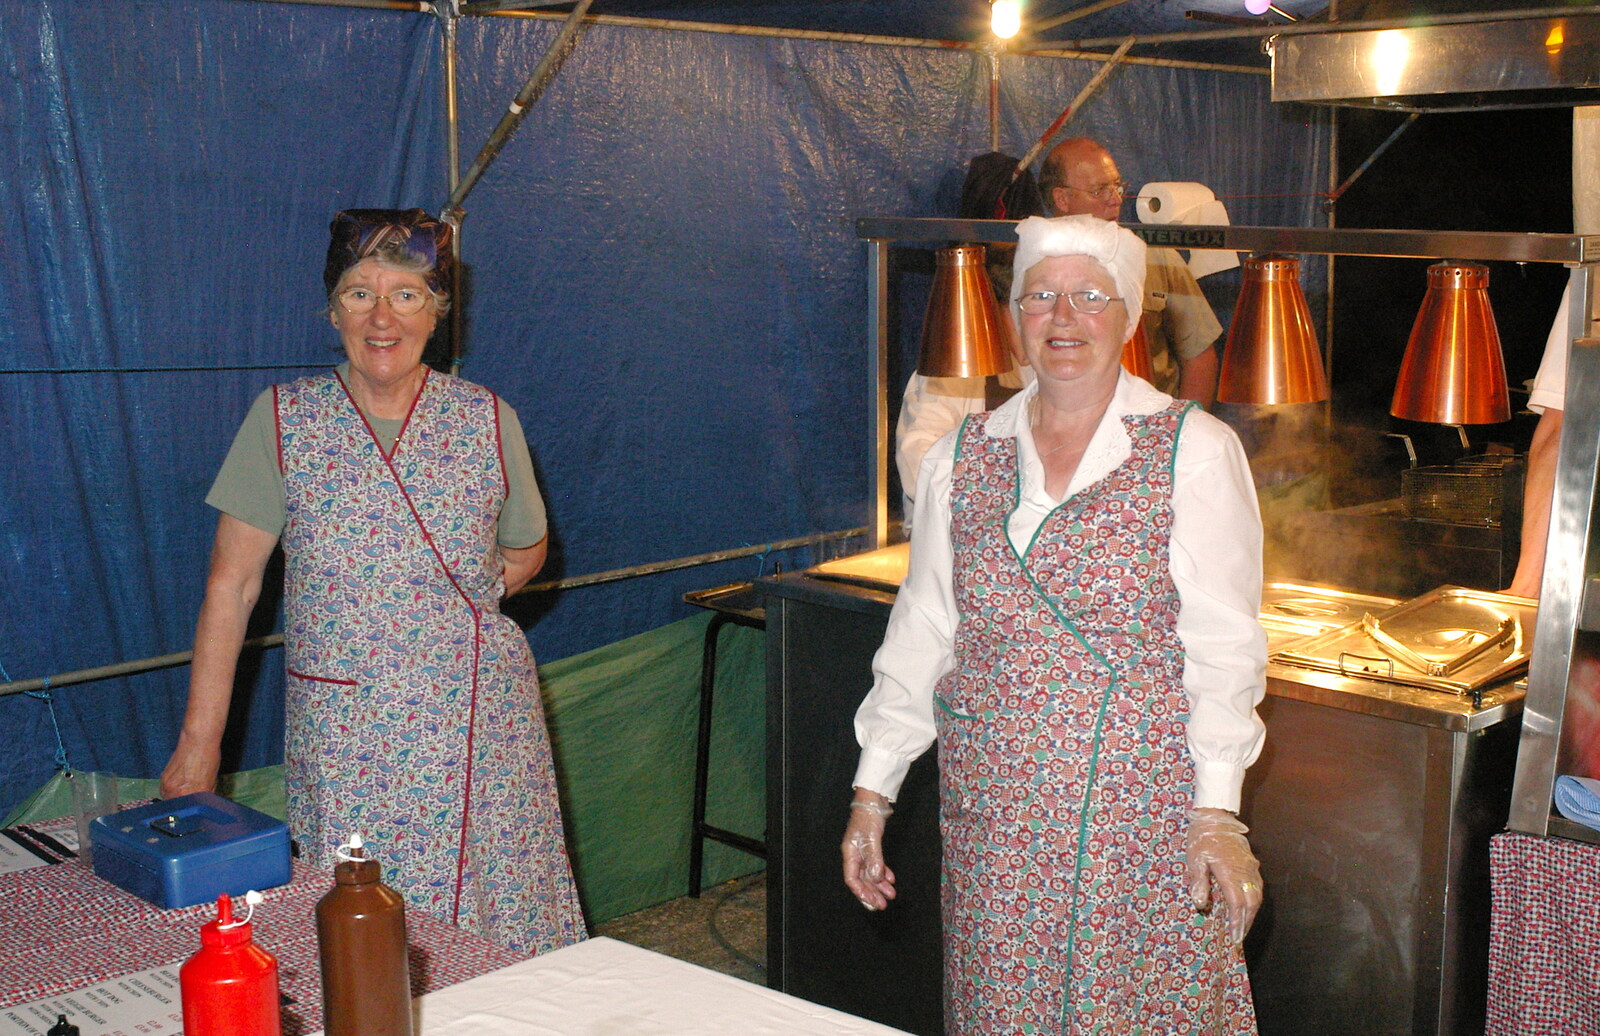 The NAAFI from Another 1940s Dance, Ellough Airfield, Beccles, Suffolk - 24th June 2005